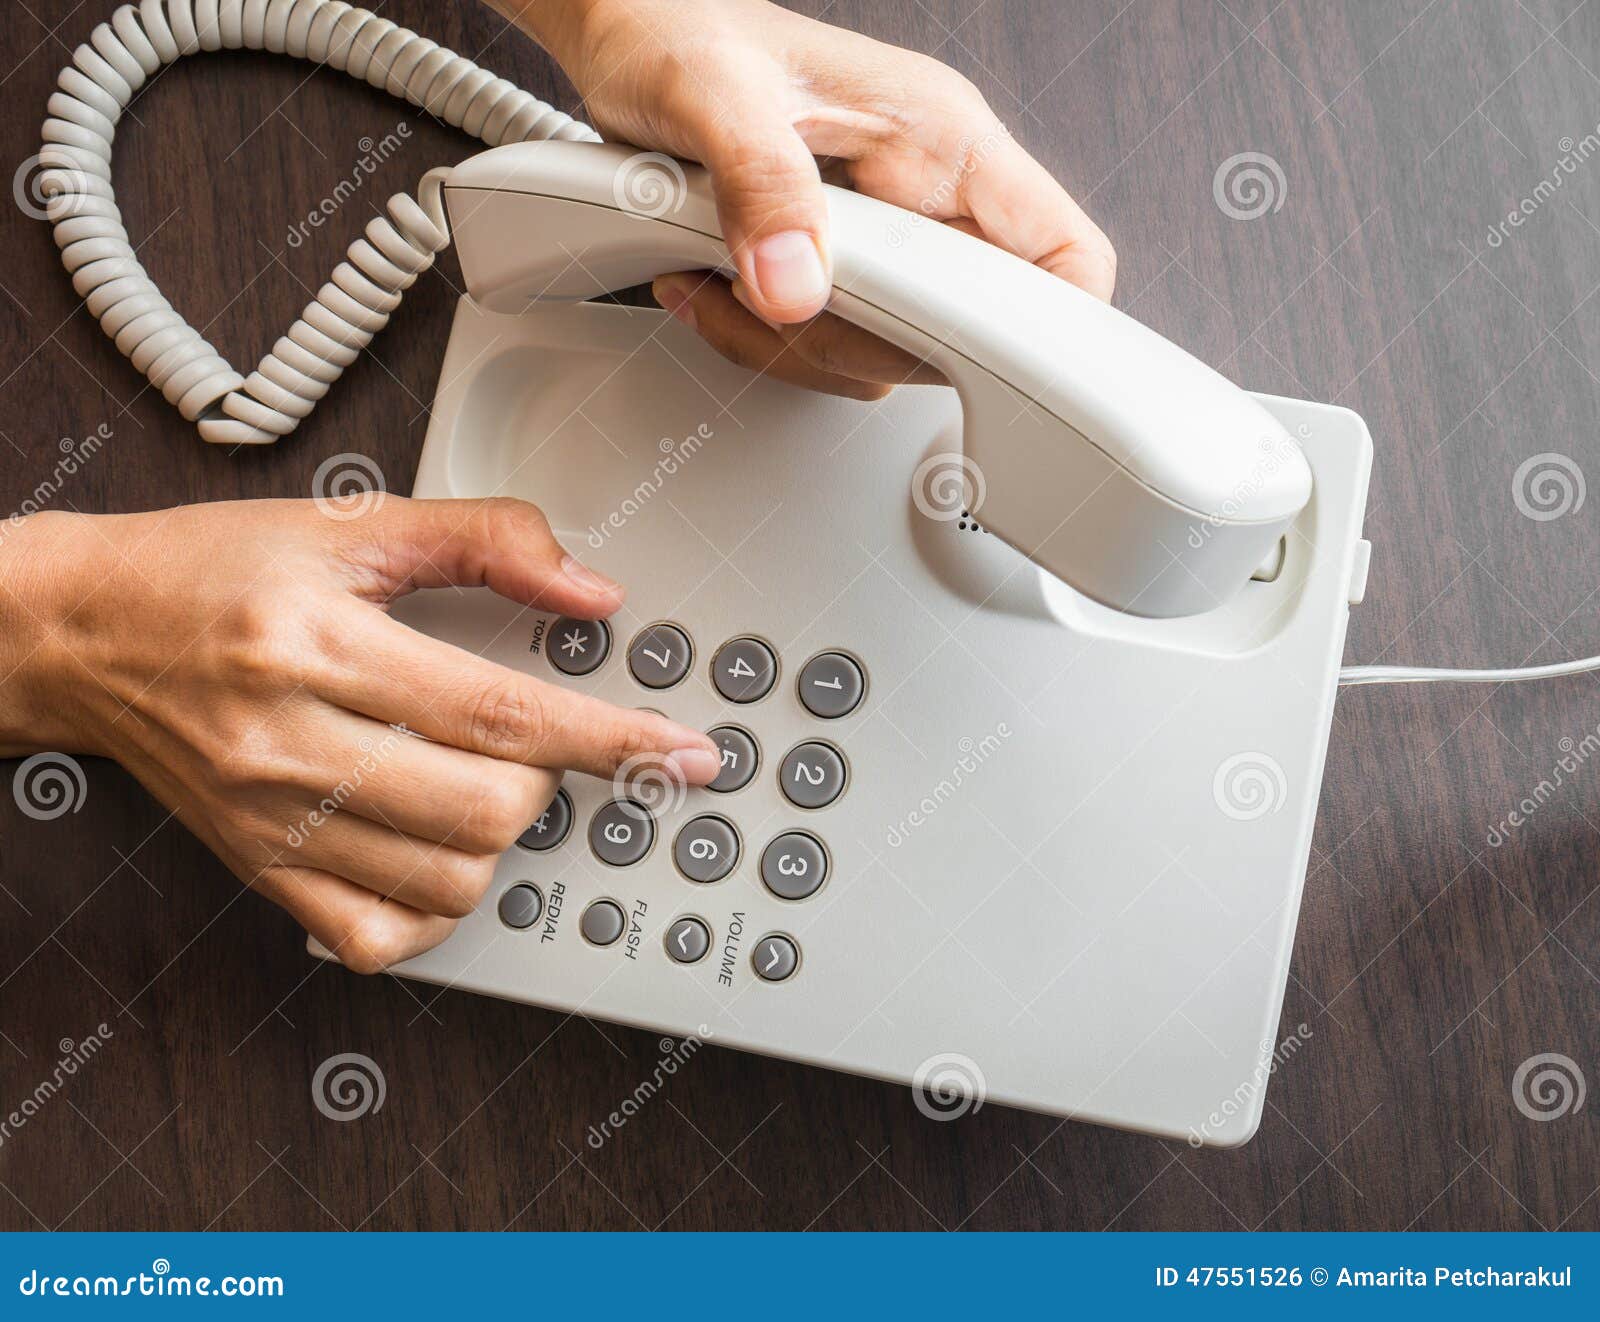 female hand dialling out on a telephone on keypad